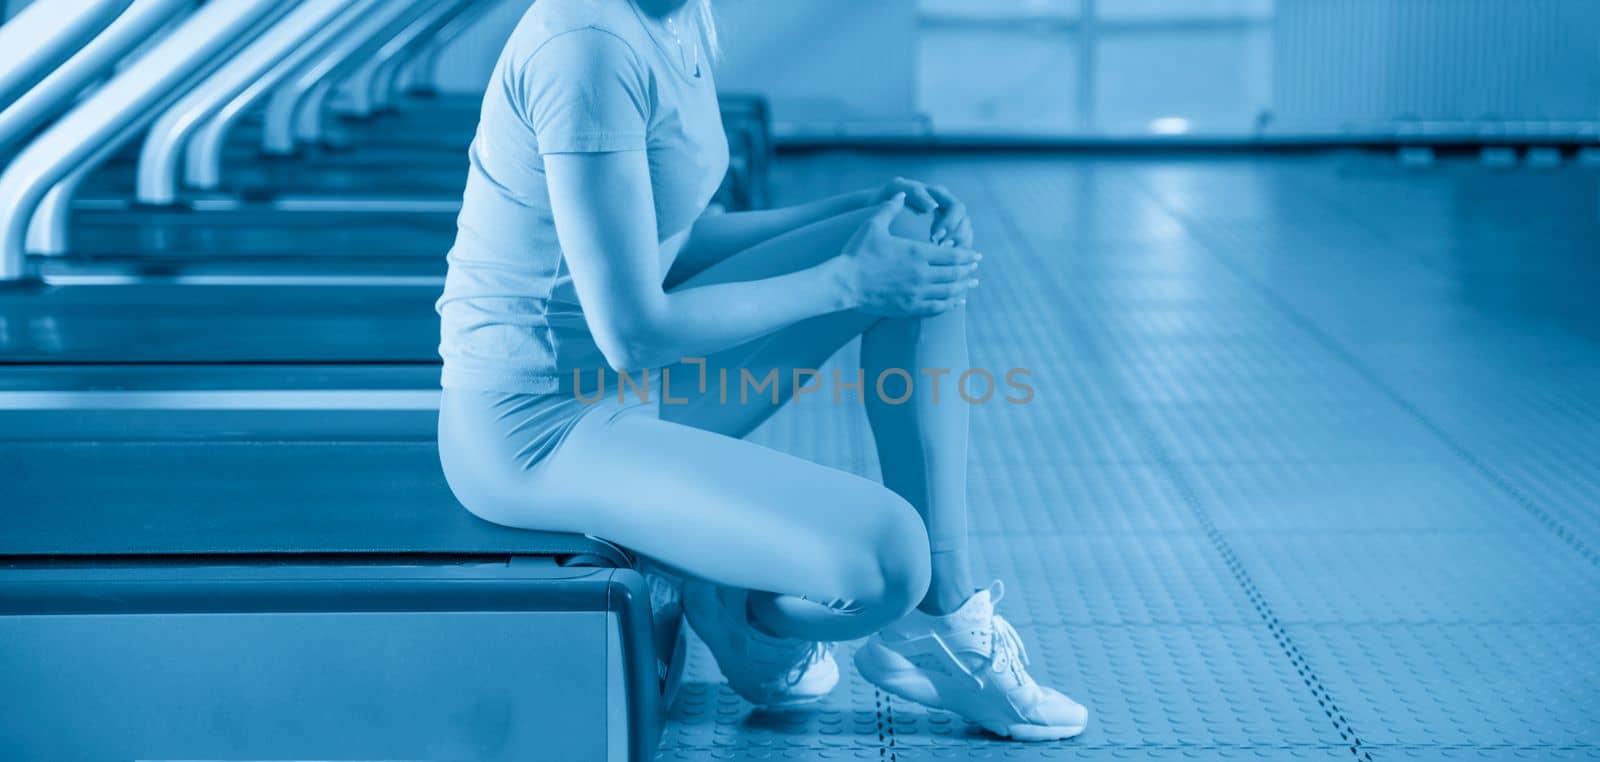 Young woman in sportswear having pain in her knee while training in gym, Girl sitting on a floor touching her knee in pain by Mariakray